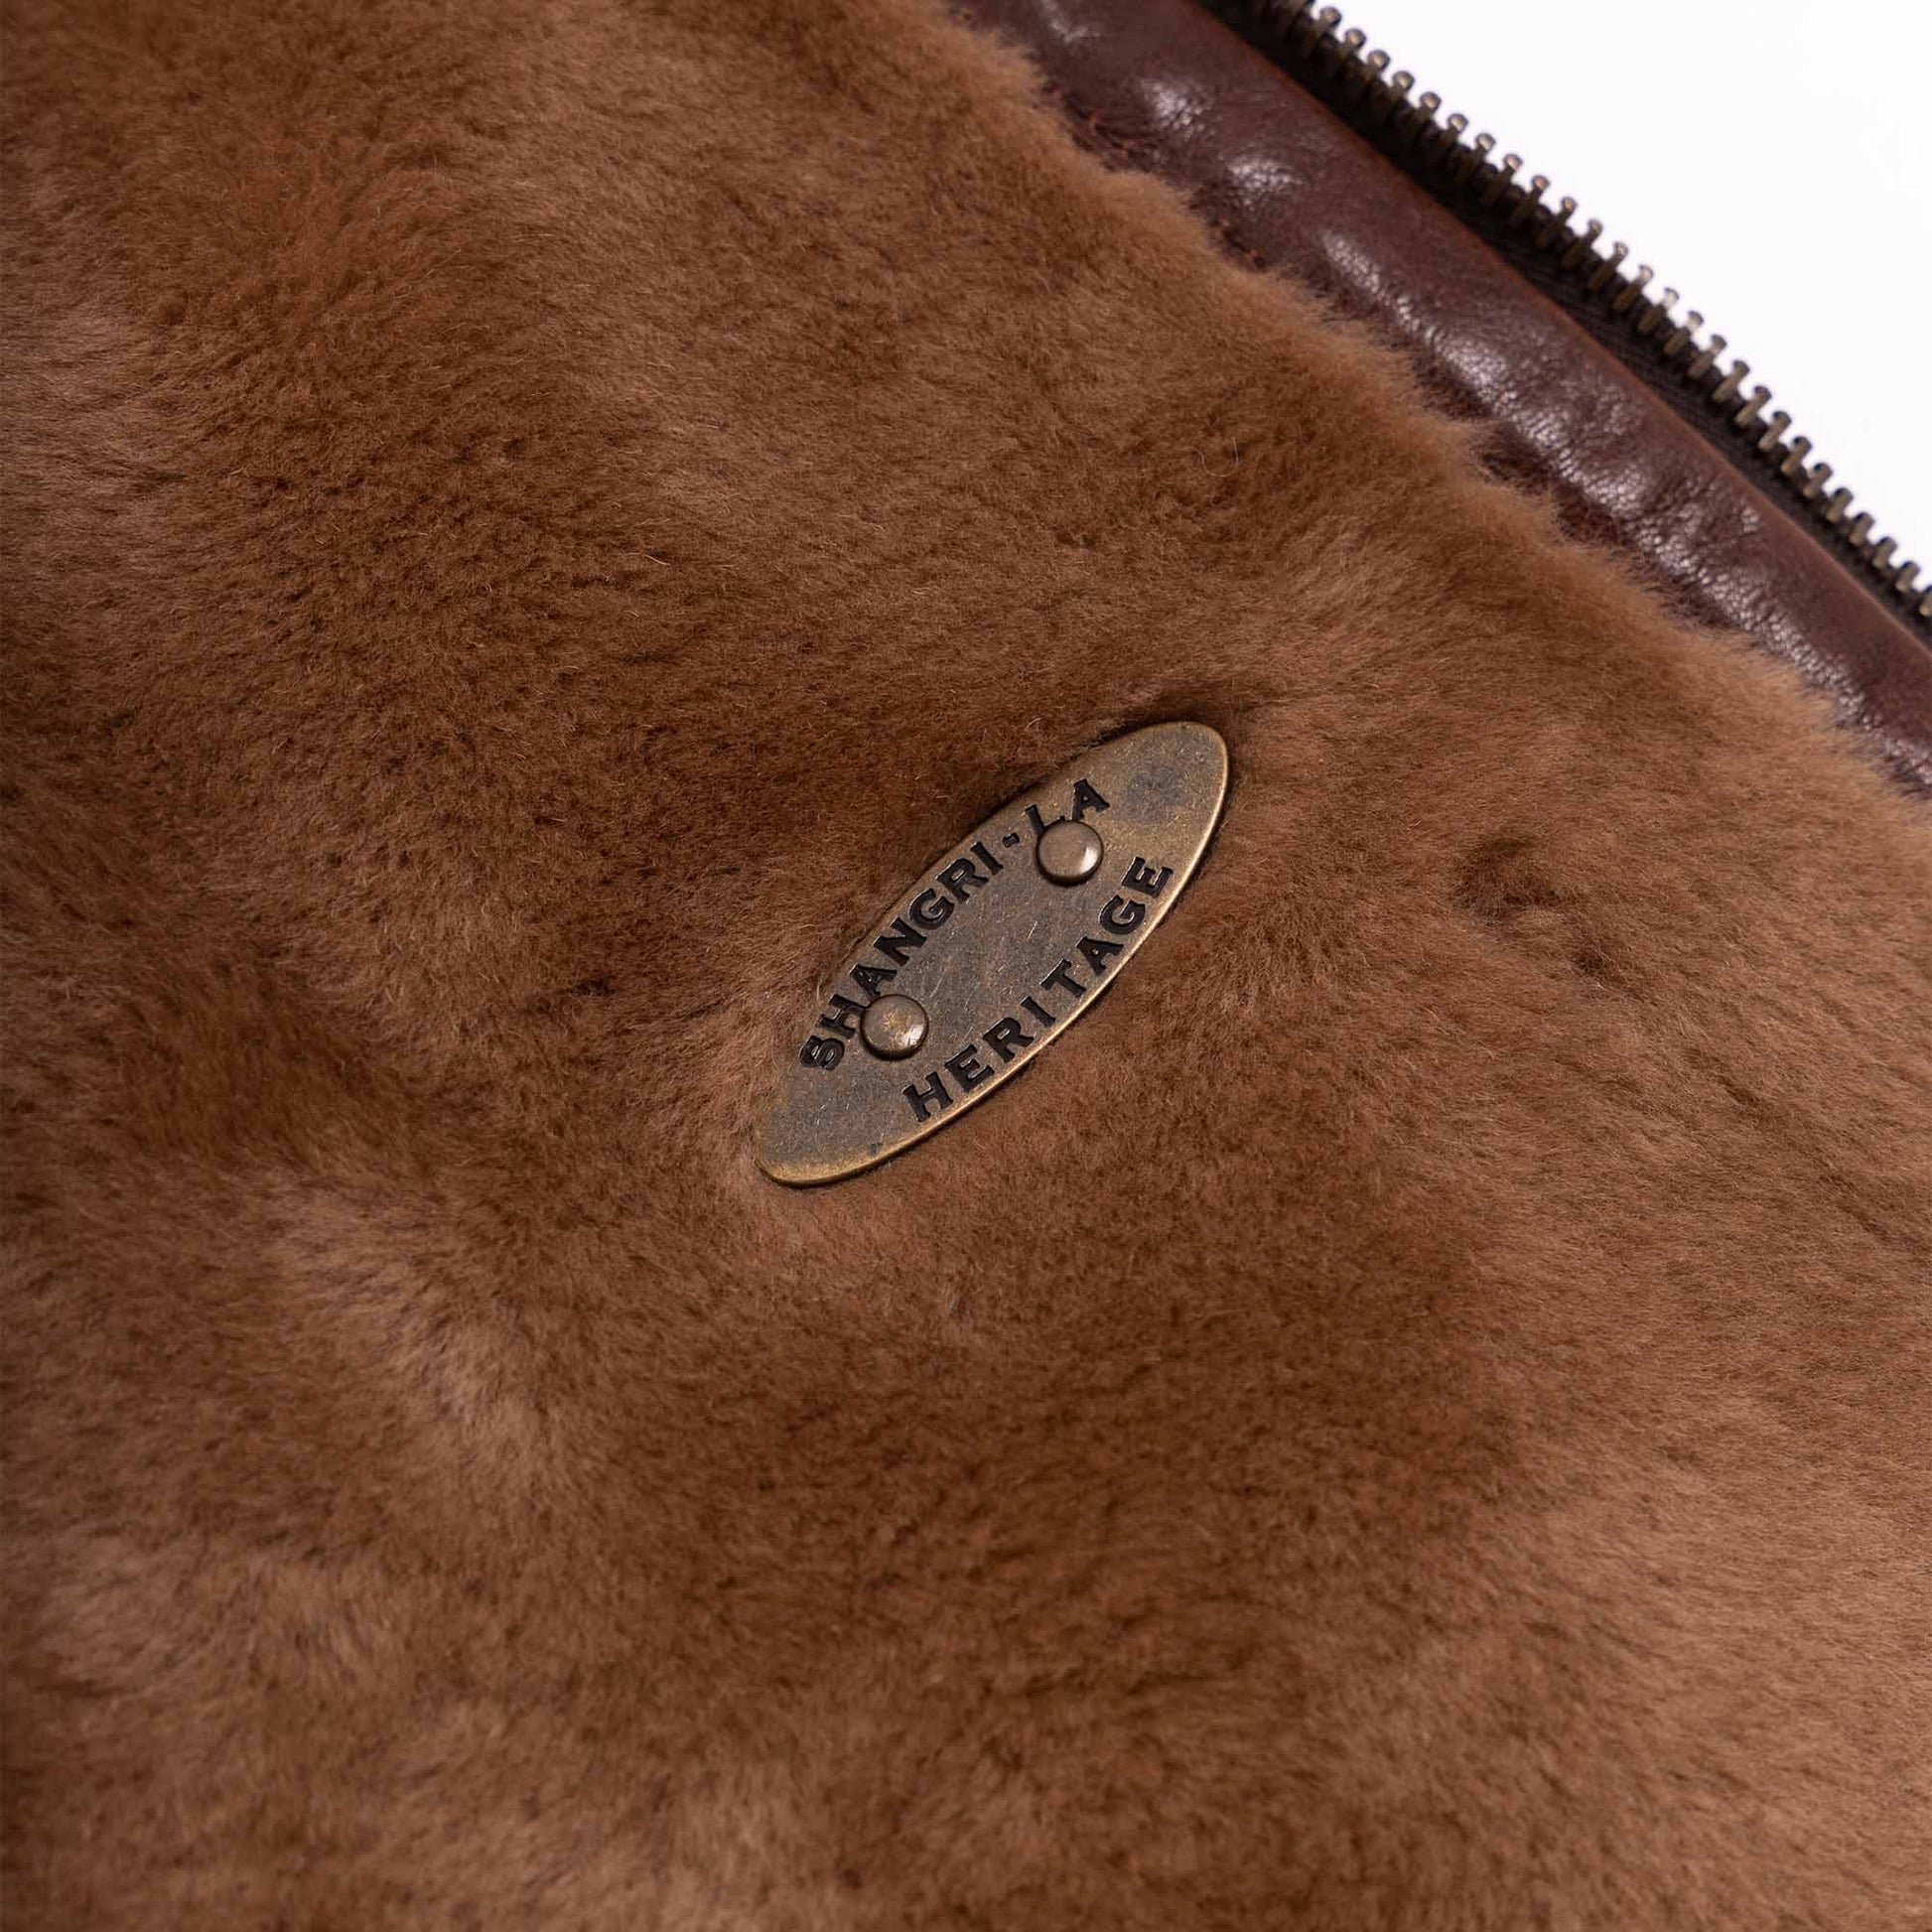 Men's Shearling Leather Vest In Chocolate Brown With Crackle Texture